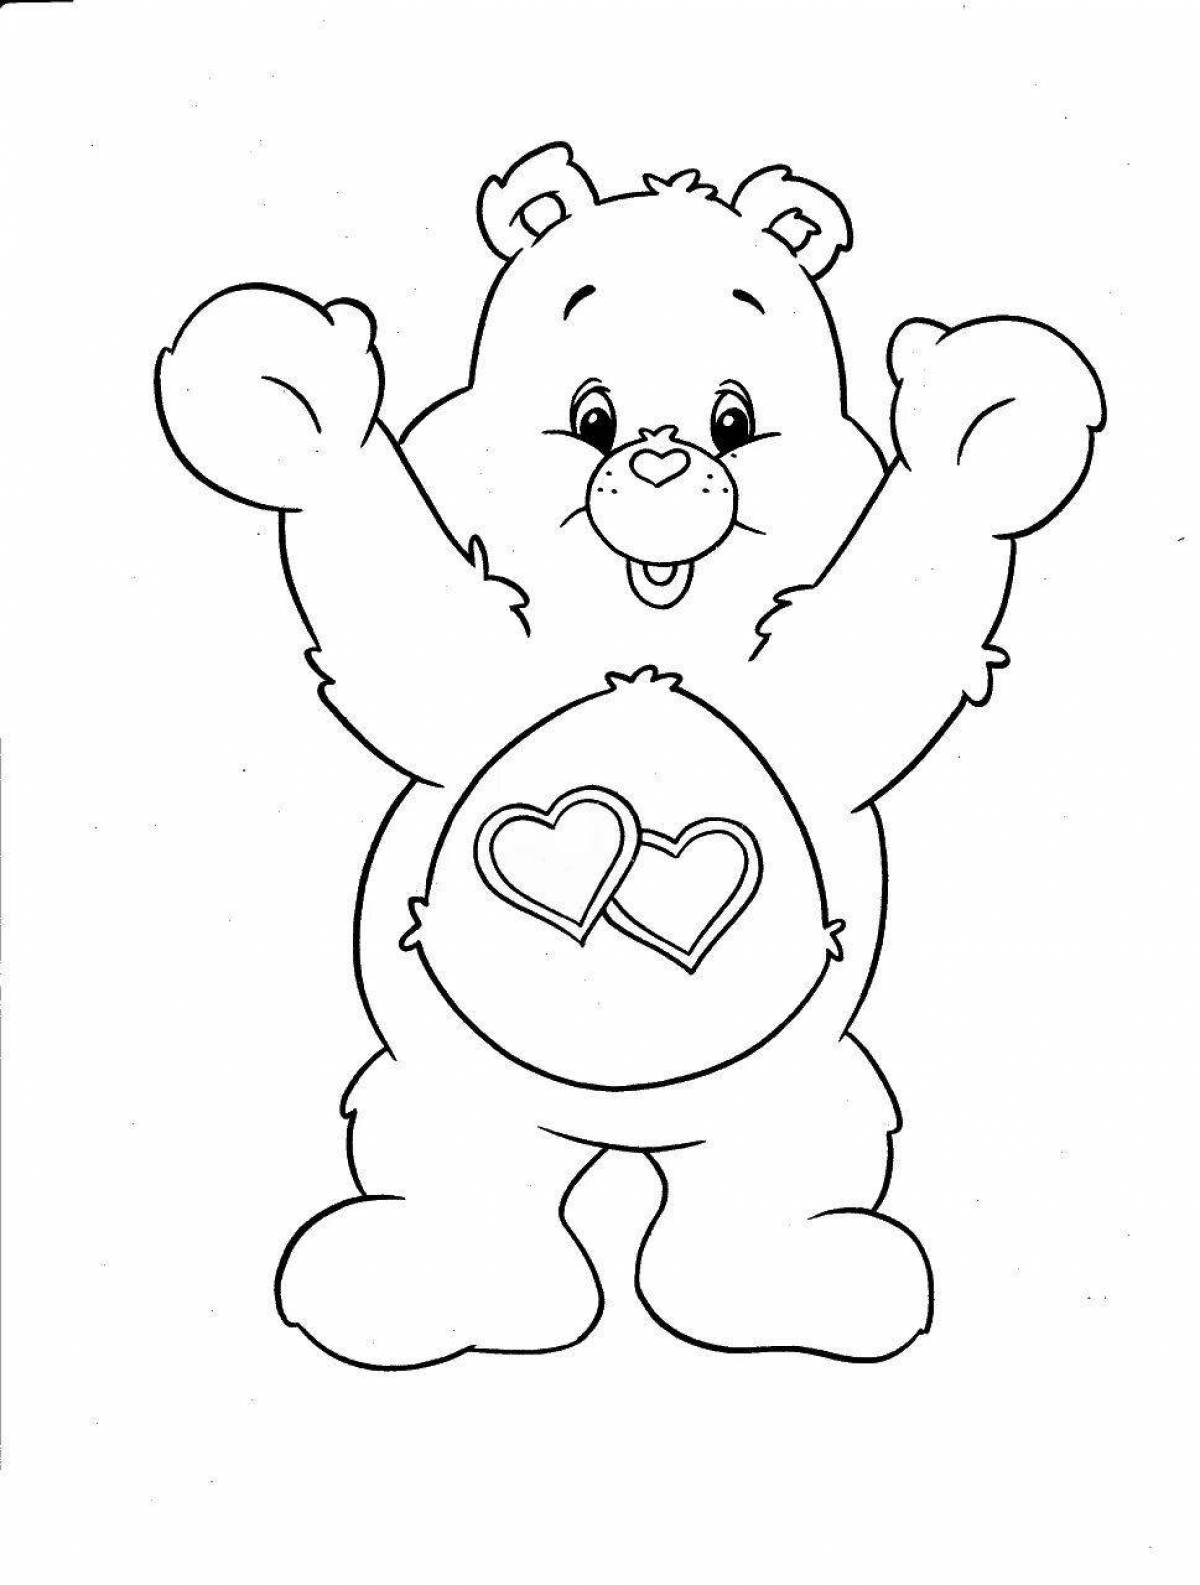 Colorful bear and rabbit coloring book